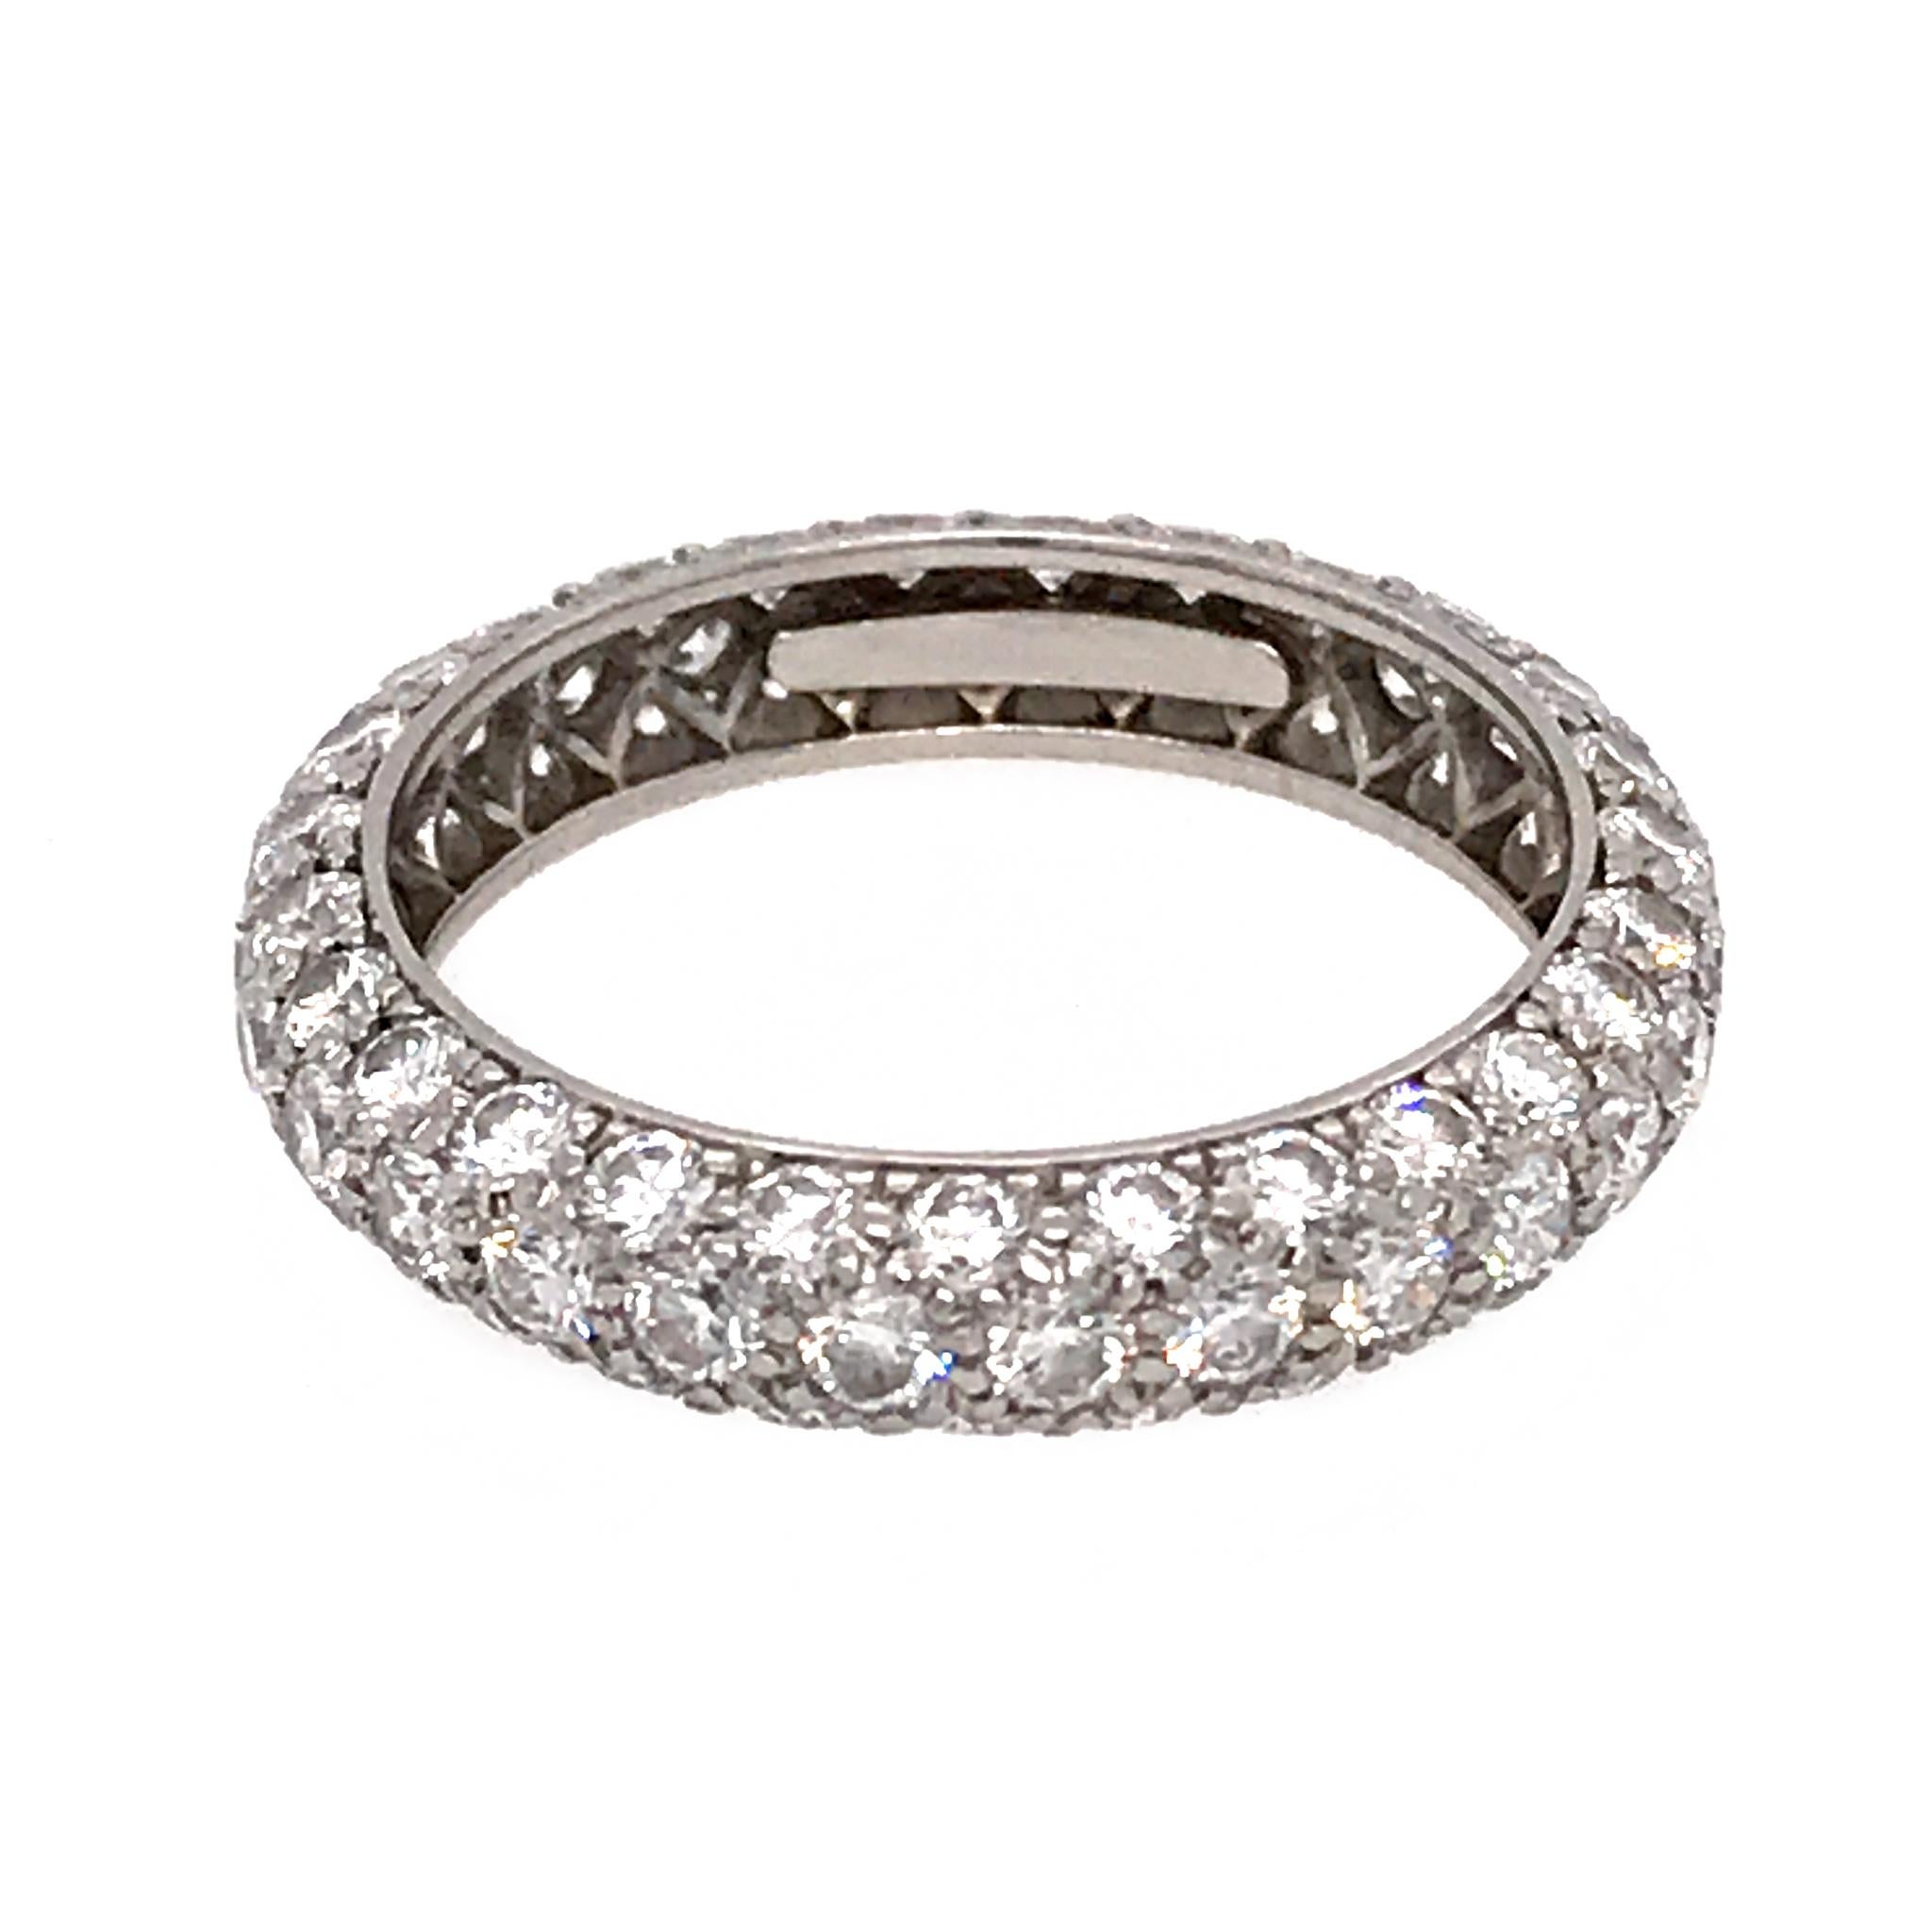 Platinum
Ring Size: 5.25
Diamond: 1.51 ct twd
Color: D-G
Clarity: Flawless -VS2
Width: 3 mm